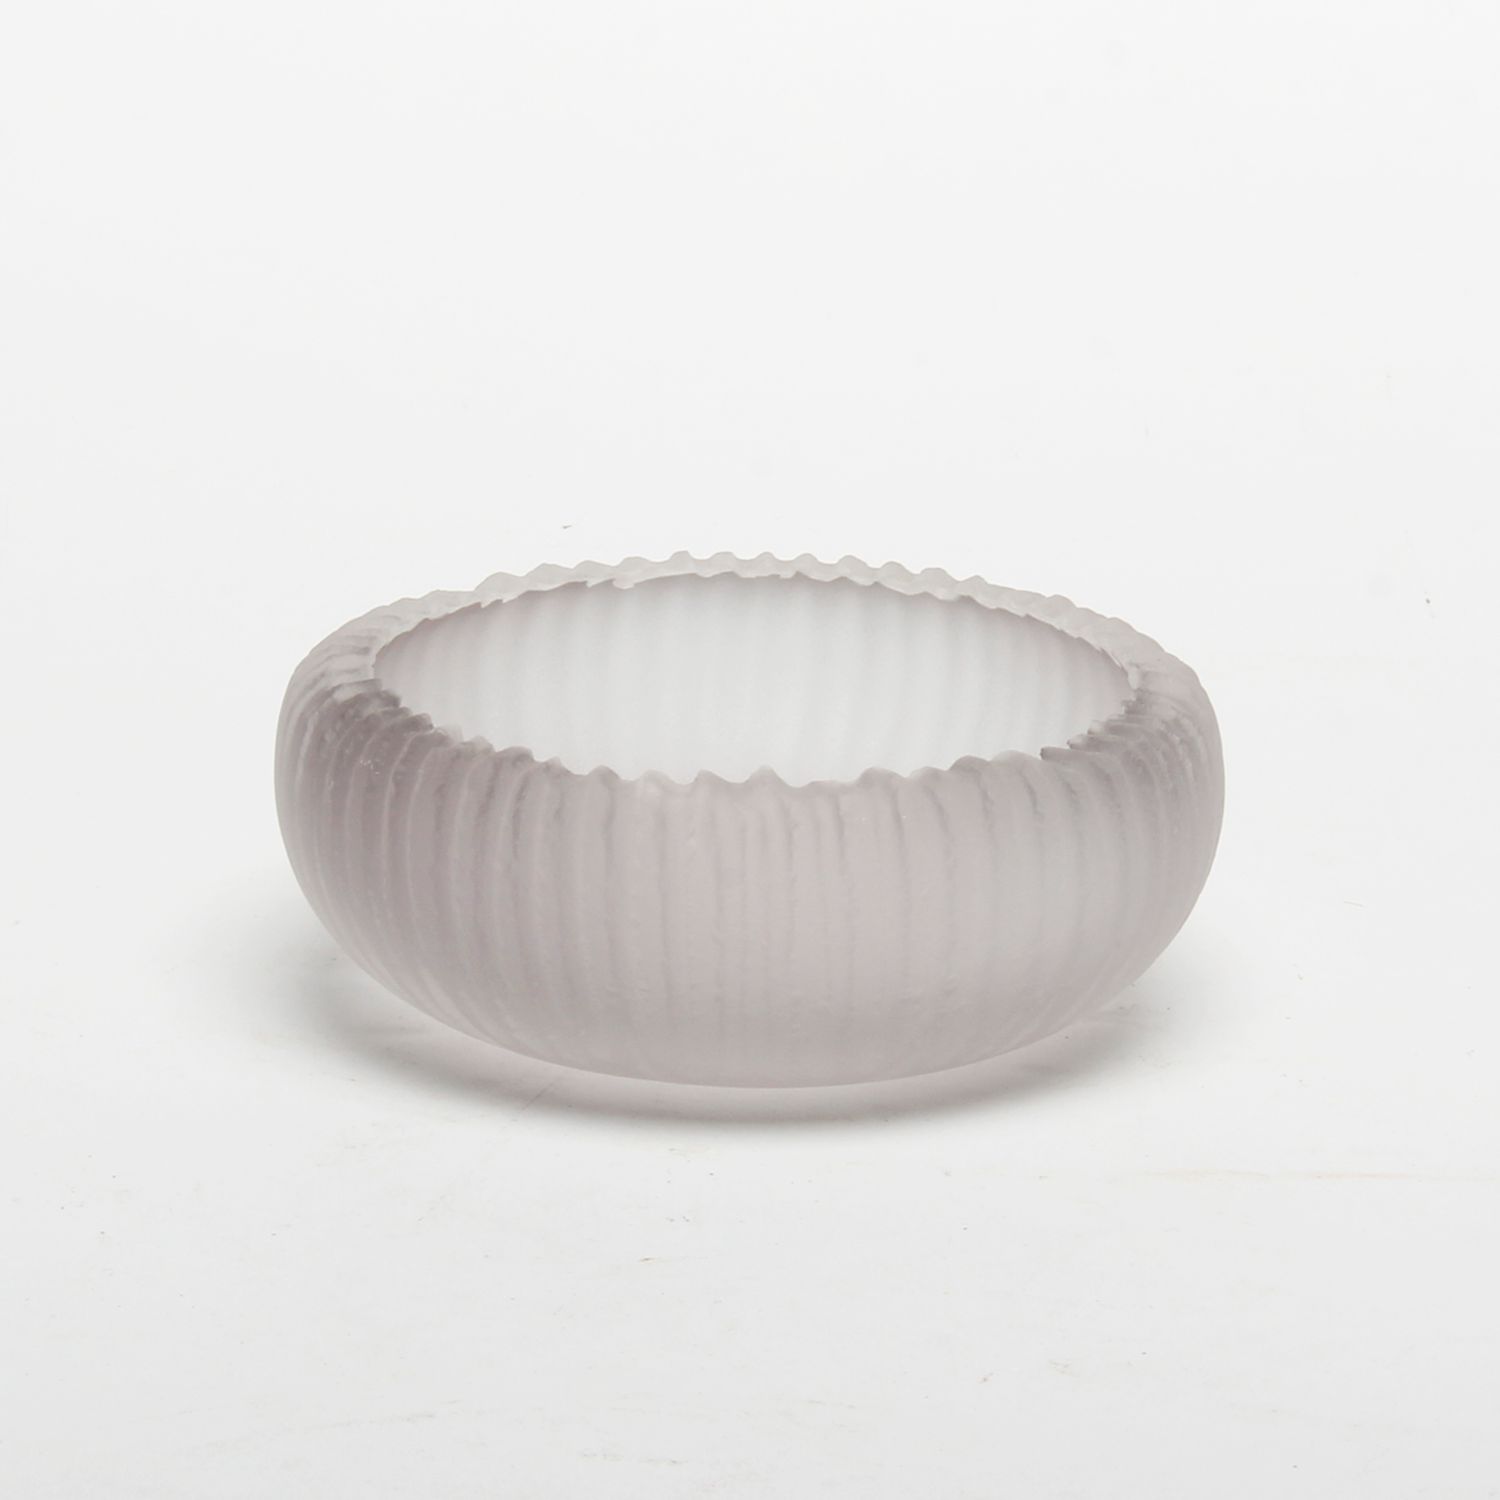 Courtney Downman: Grey Saw Carved Glass Dish Product Image 1 of 2